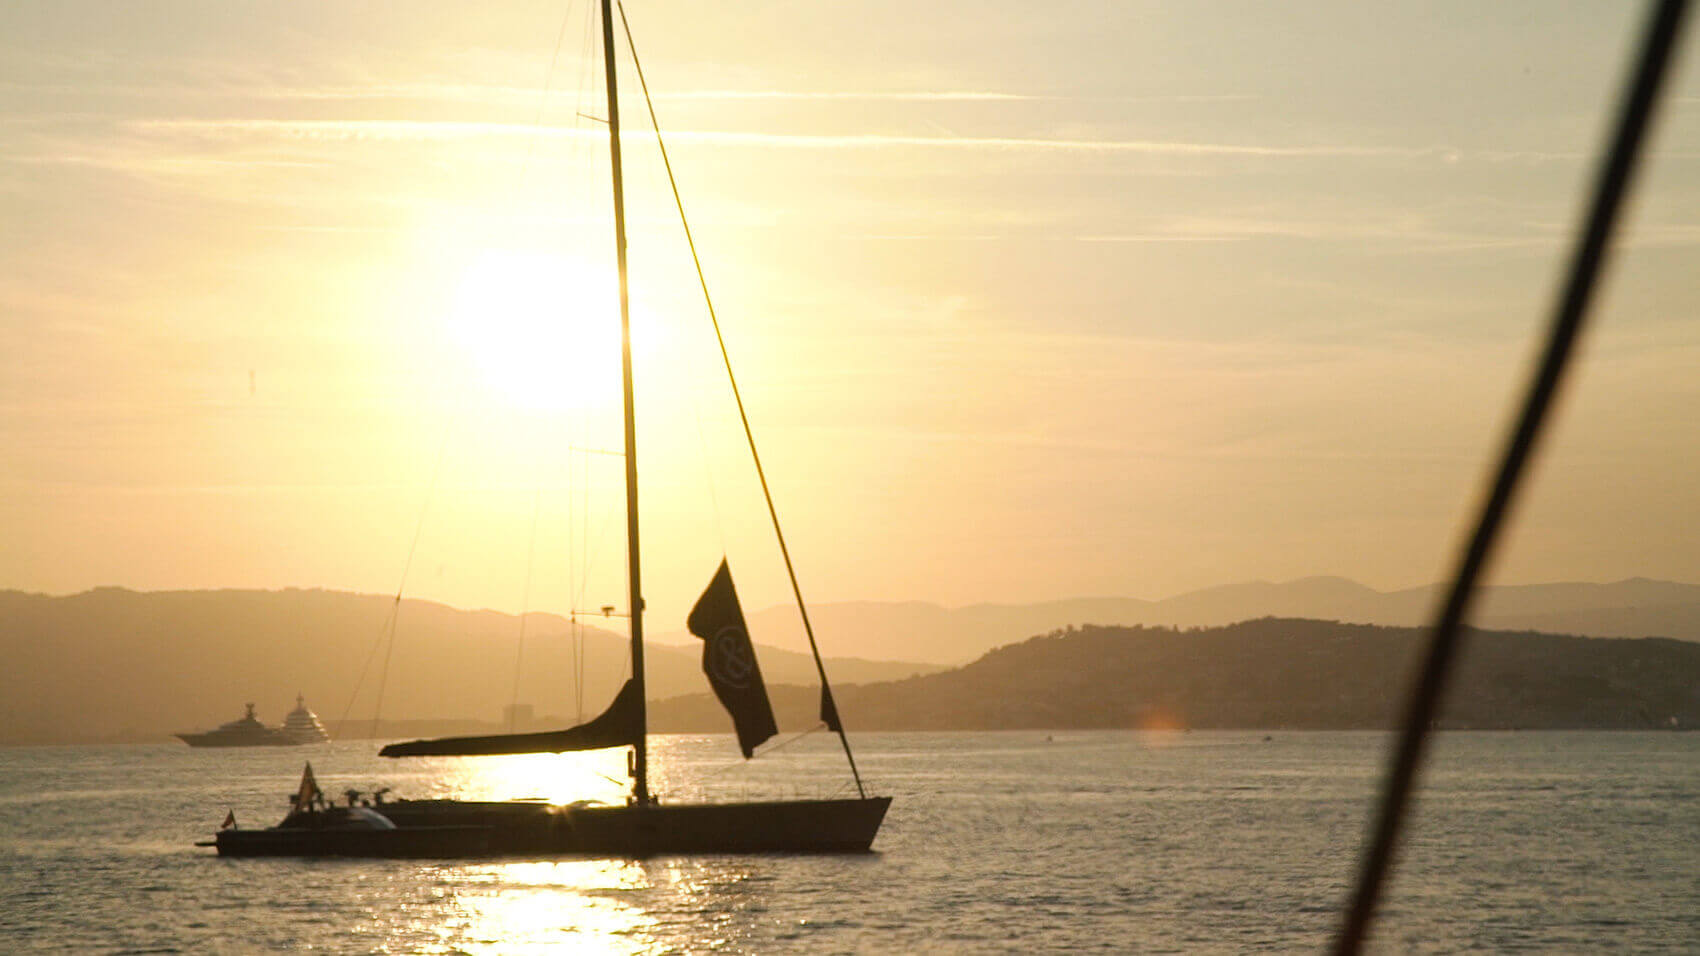 Still of a yacht at sunset from an event videos example for Wall Street Journal